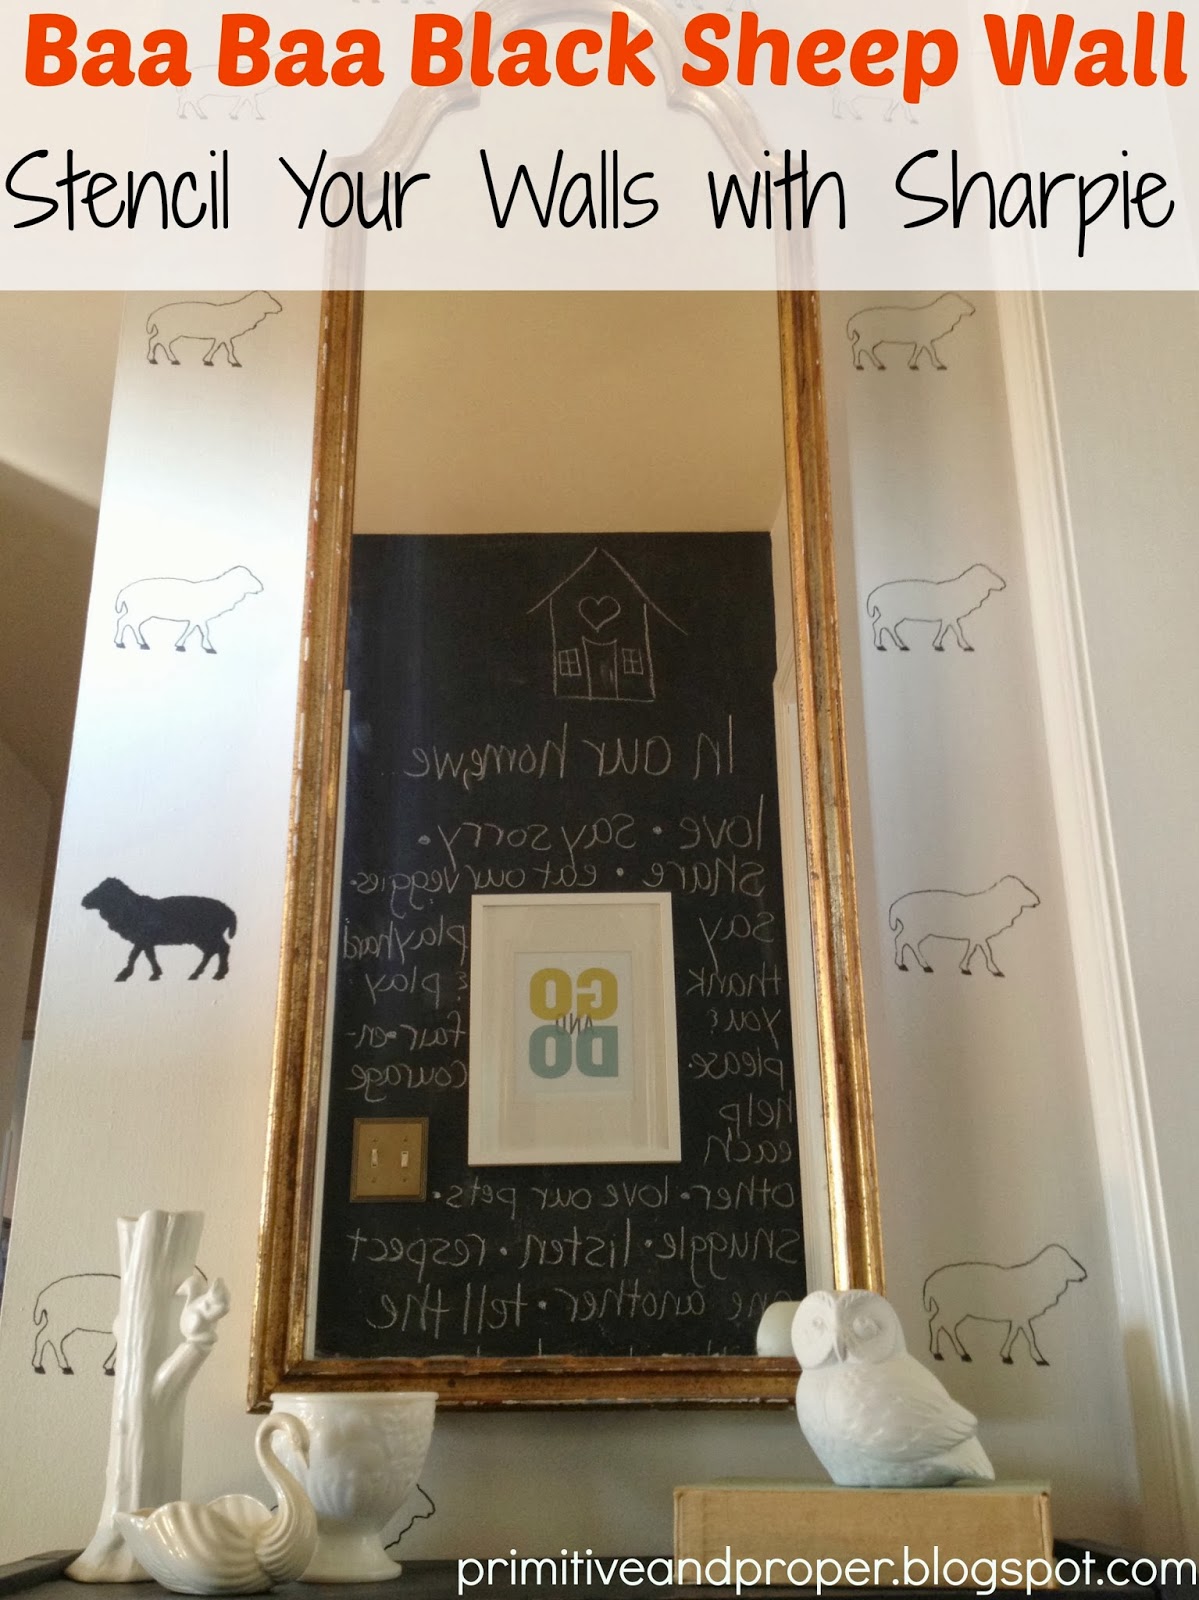 How to Stencil Chalkboards - Practical Whimsy Designs